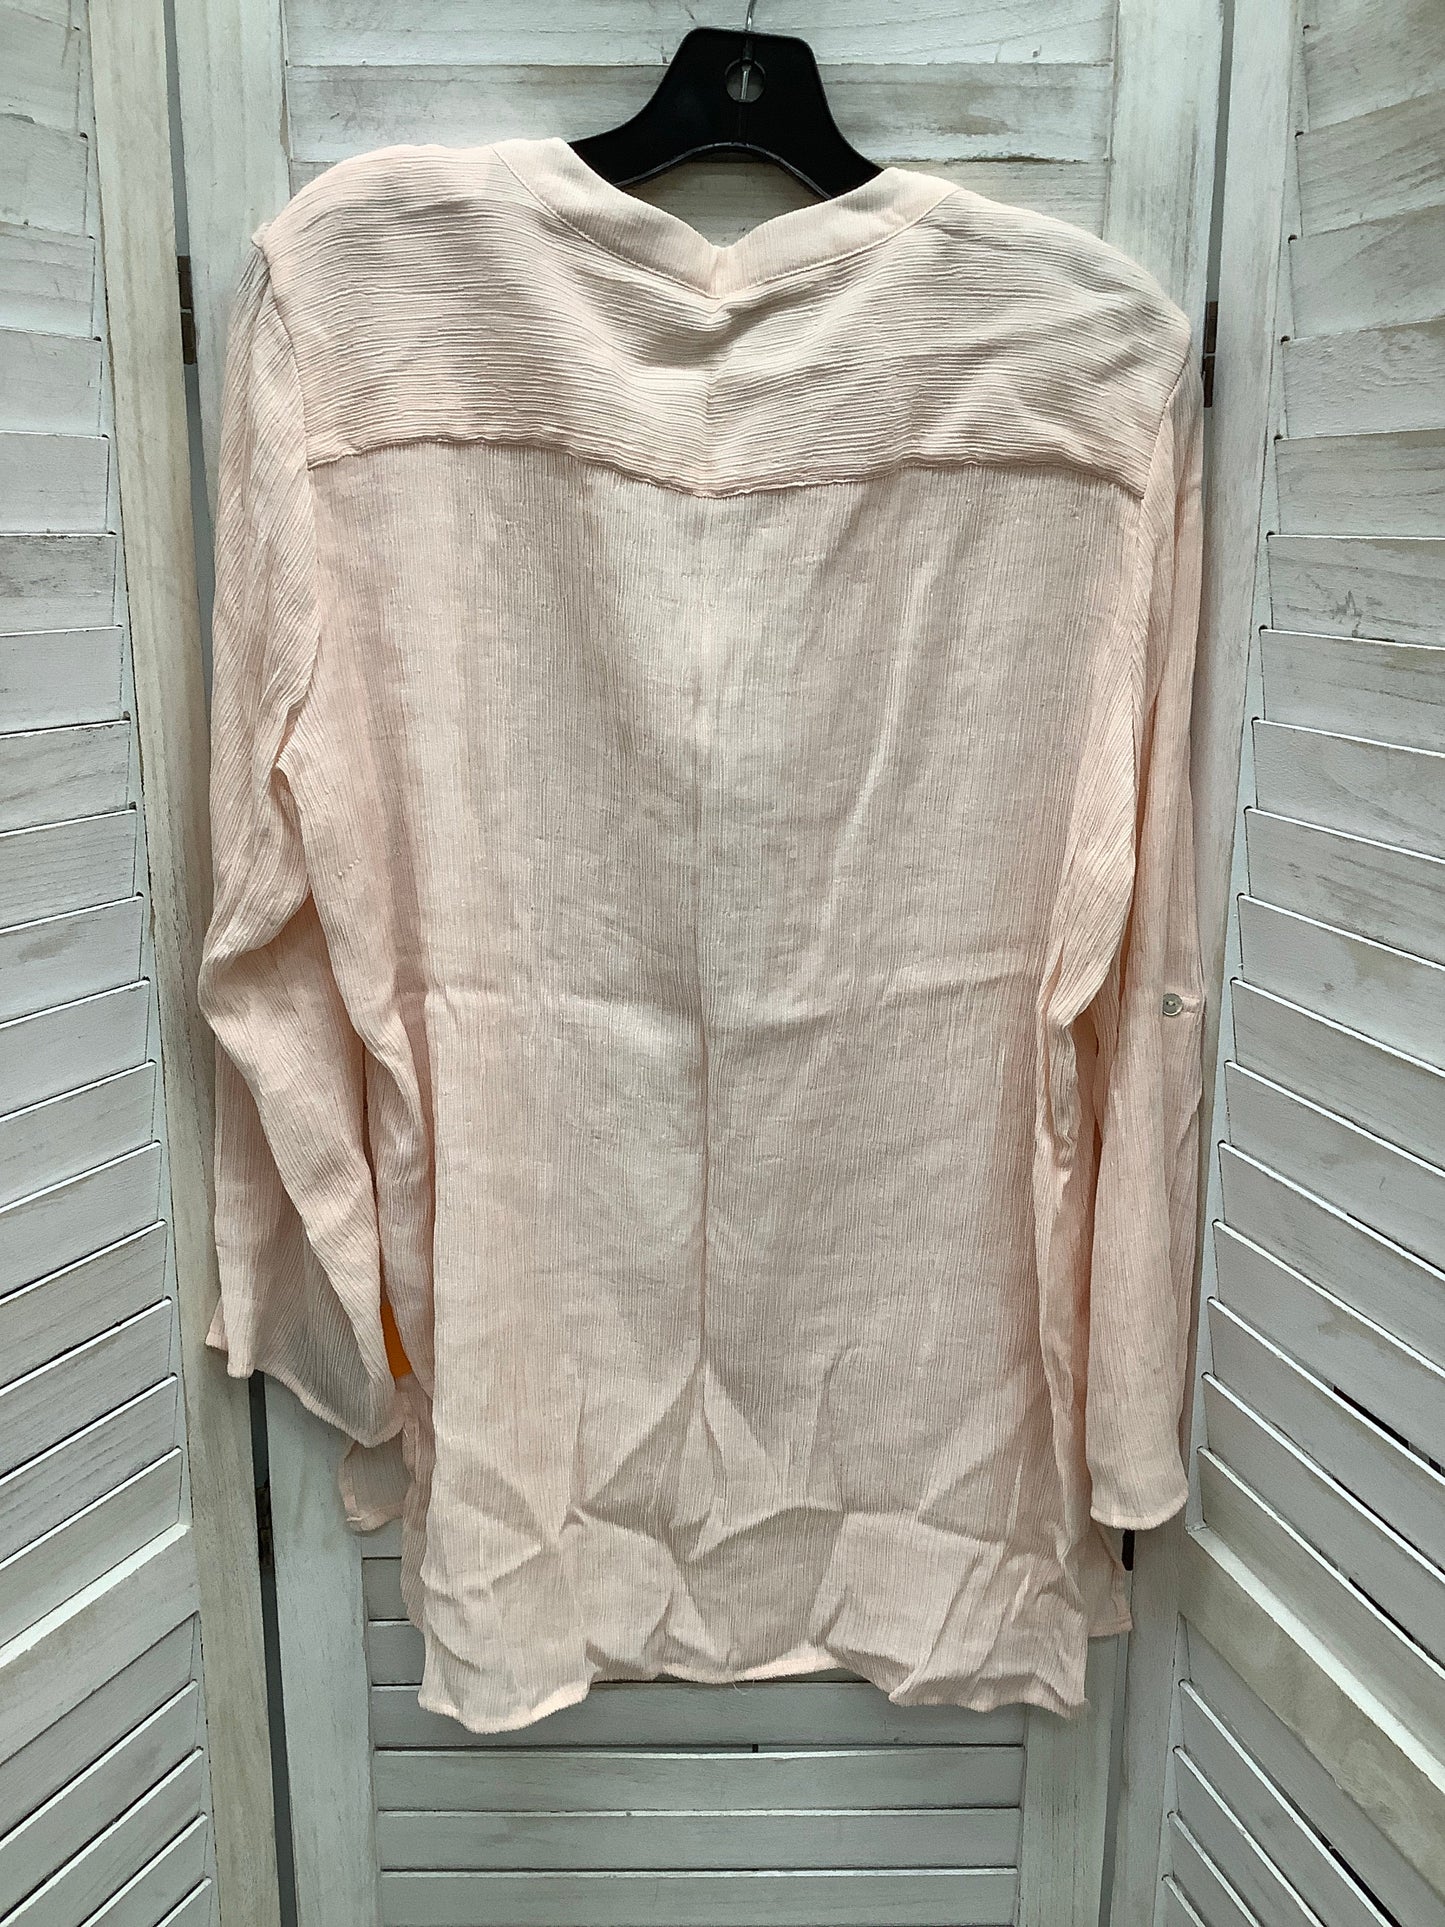 Top Long Sleeve By Kim Rogers  Size: Xl